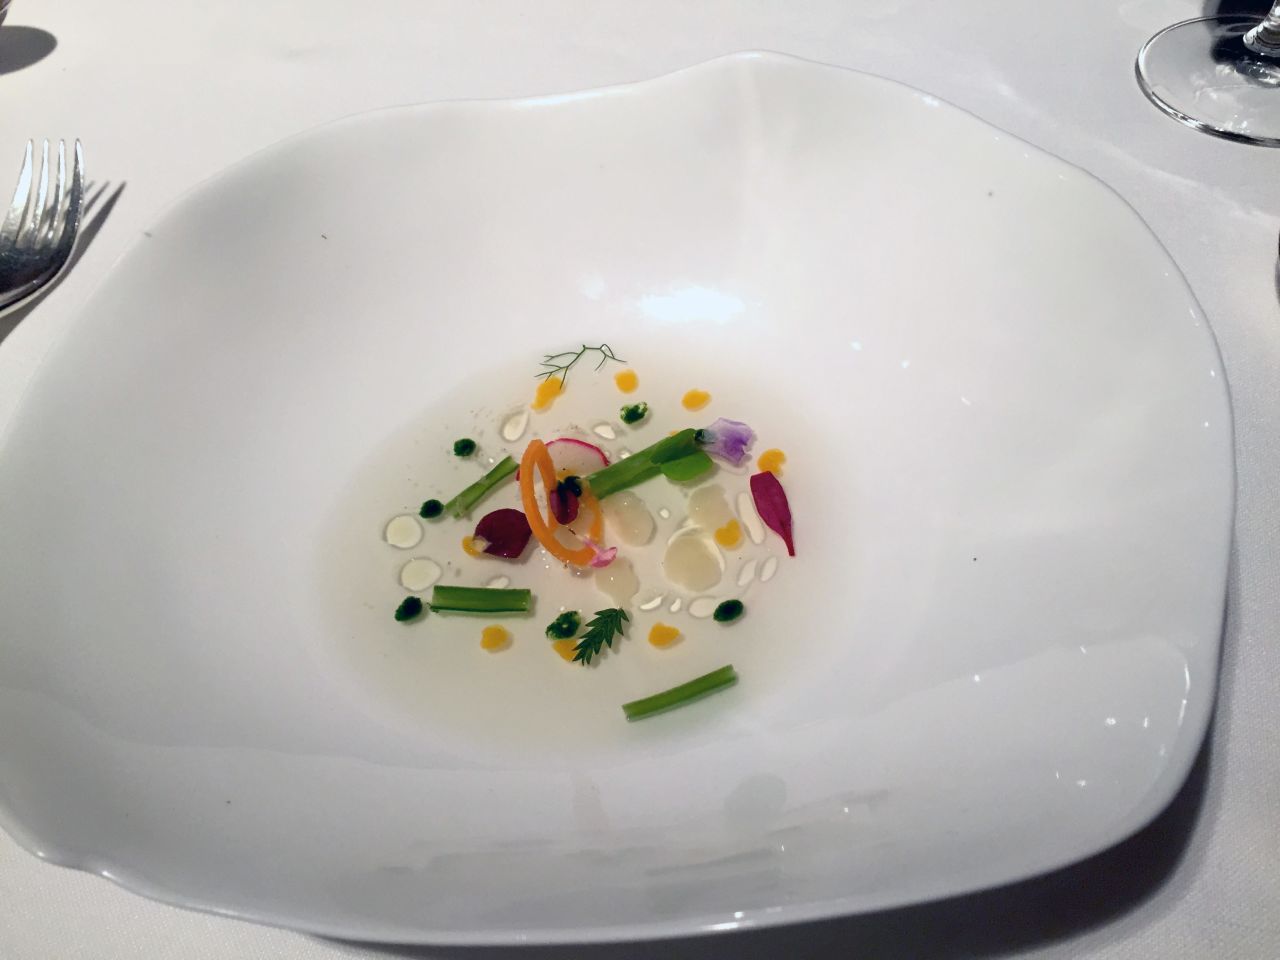 One of 21 courses served at El Celler de Can Roca during its 2014/2015 dining season, Summer Vegetable Stock is a vegetable emulsion with gelatinous drops of vegetables and a colorful sprinkling of flowers and leaves. The restaurant will offer a new menu when it re-opens its doors on September 14 following its annual summer recess. 